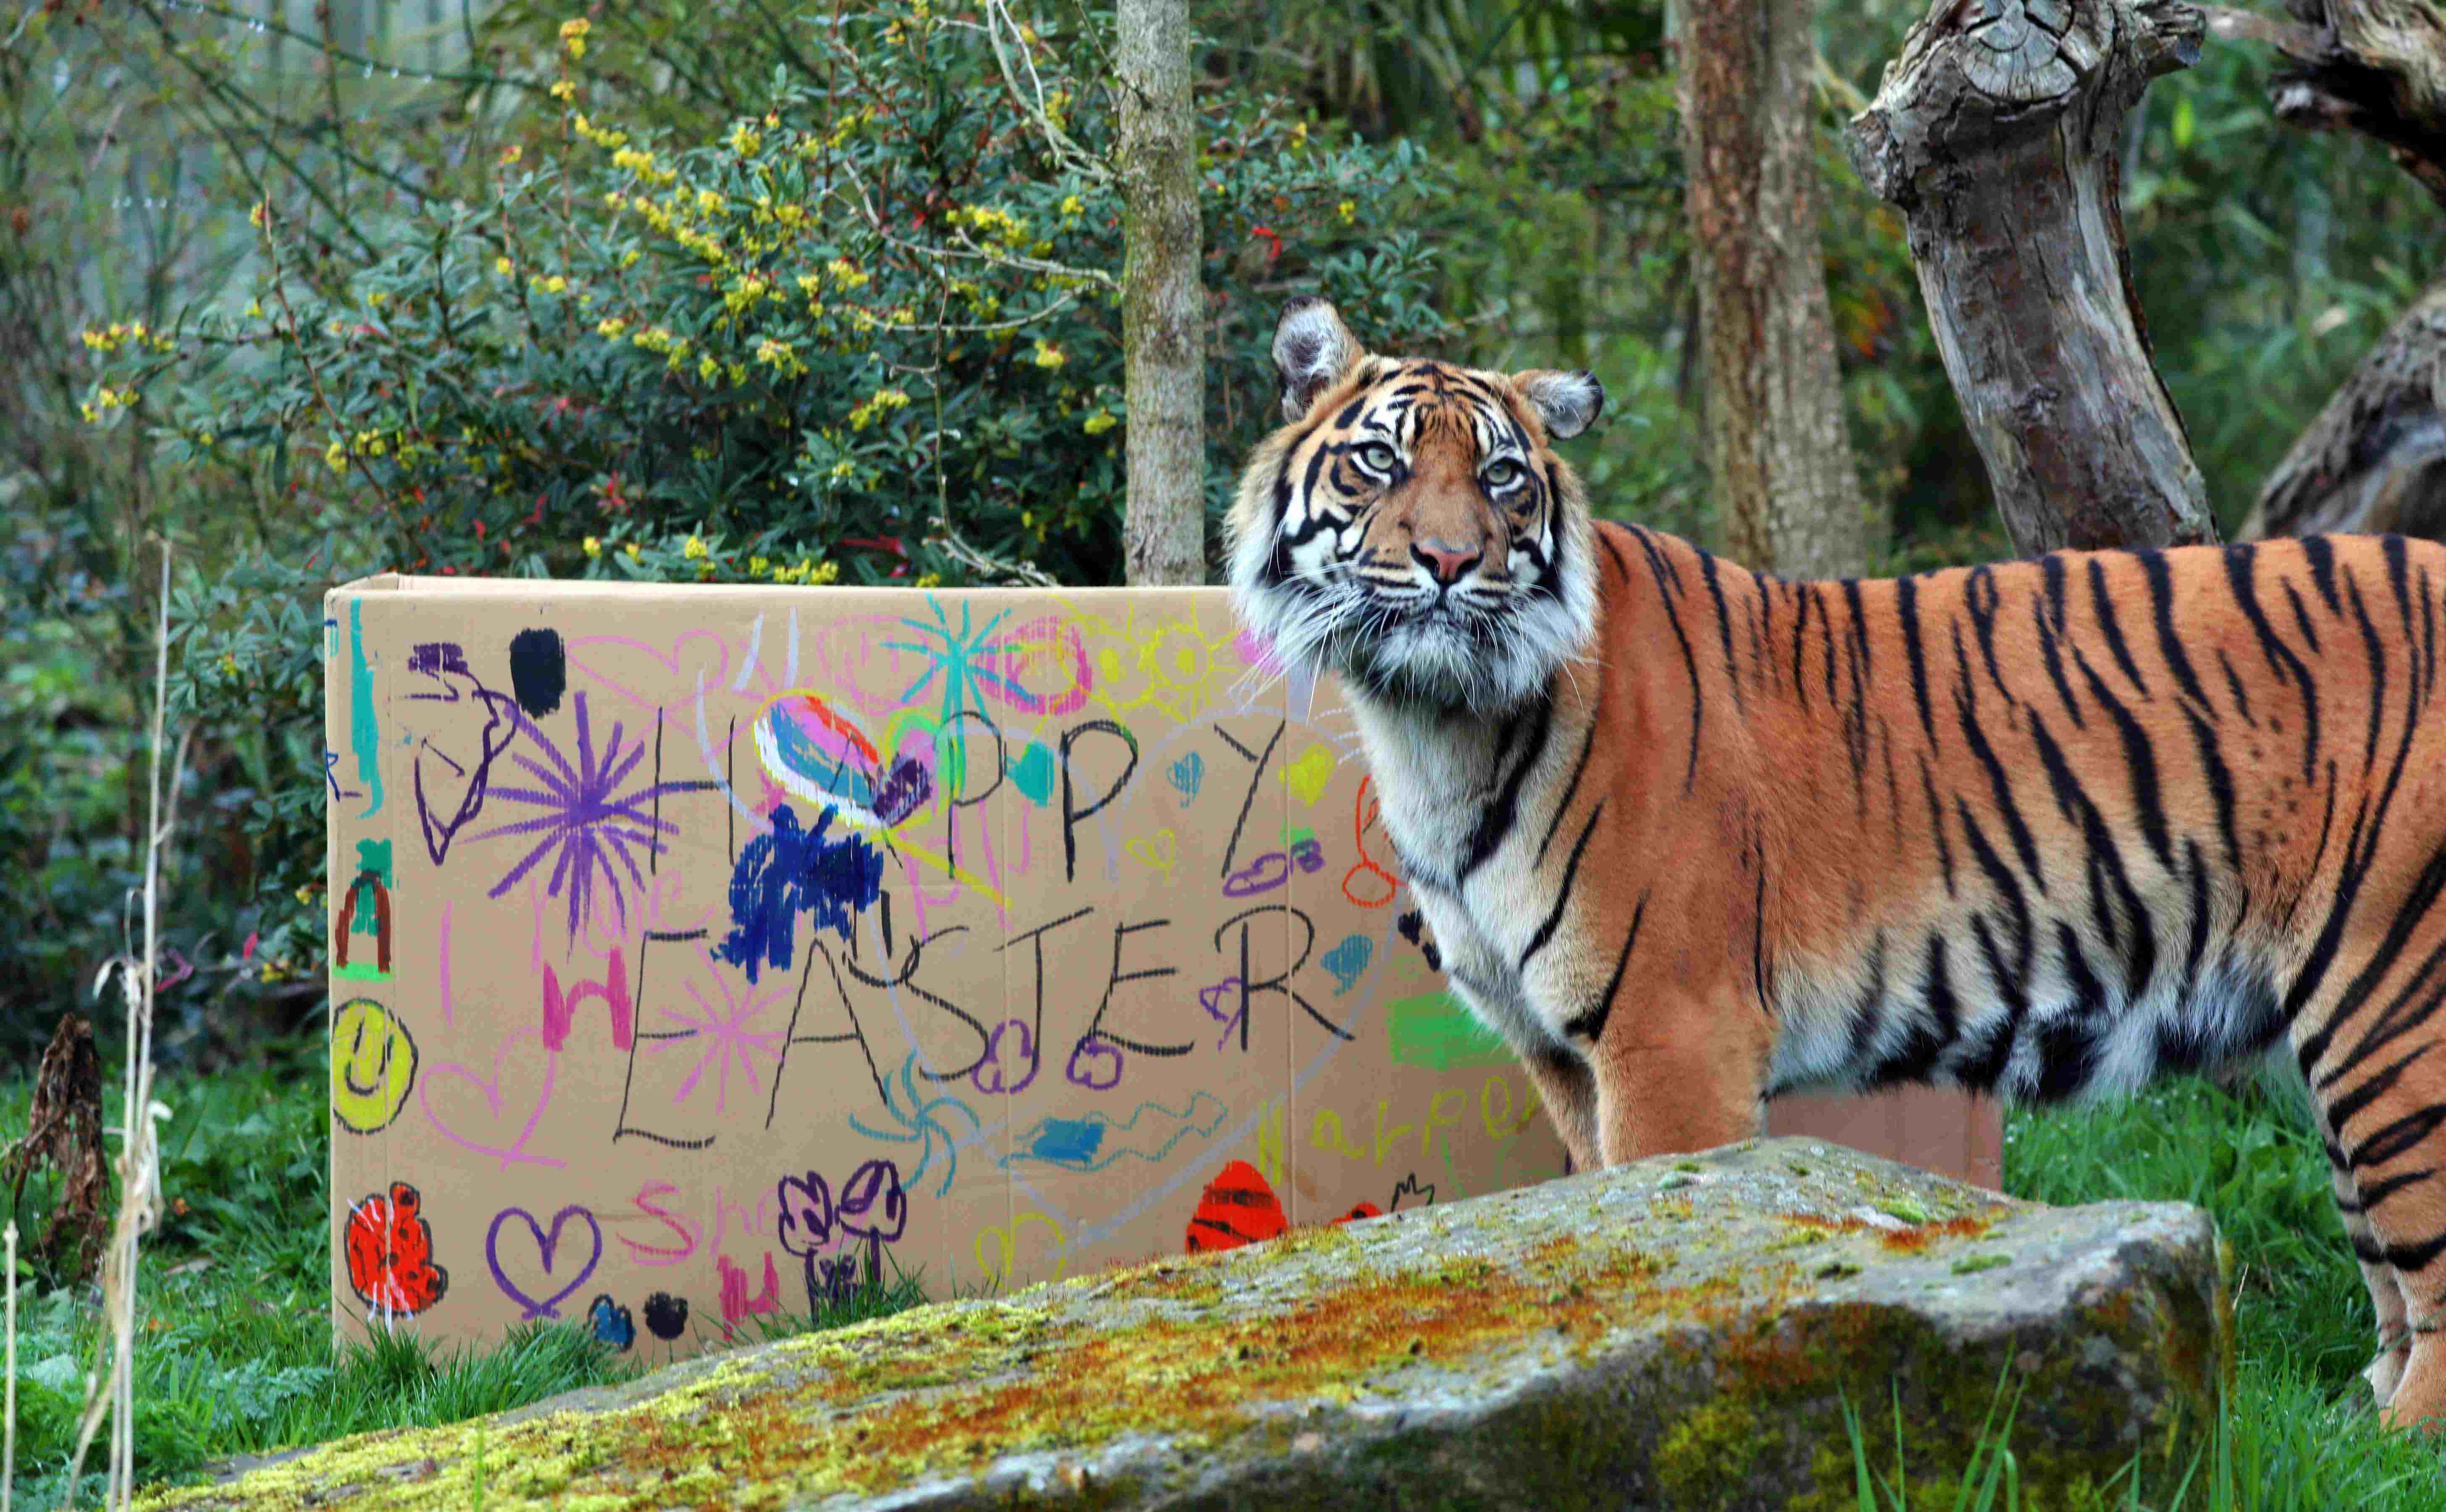 Sumatran tiger Dharma standing next to large box decorated by children supported by Edinburgh Children's Hospital Charity ECHC

Image: AMY MIDDLETON 2023